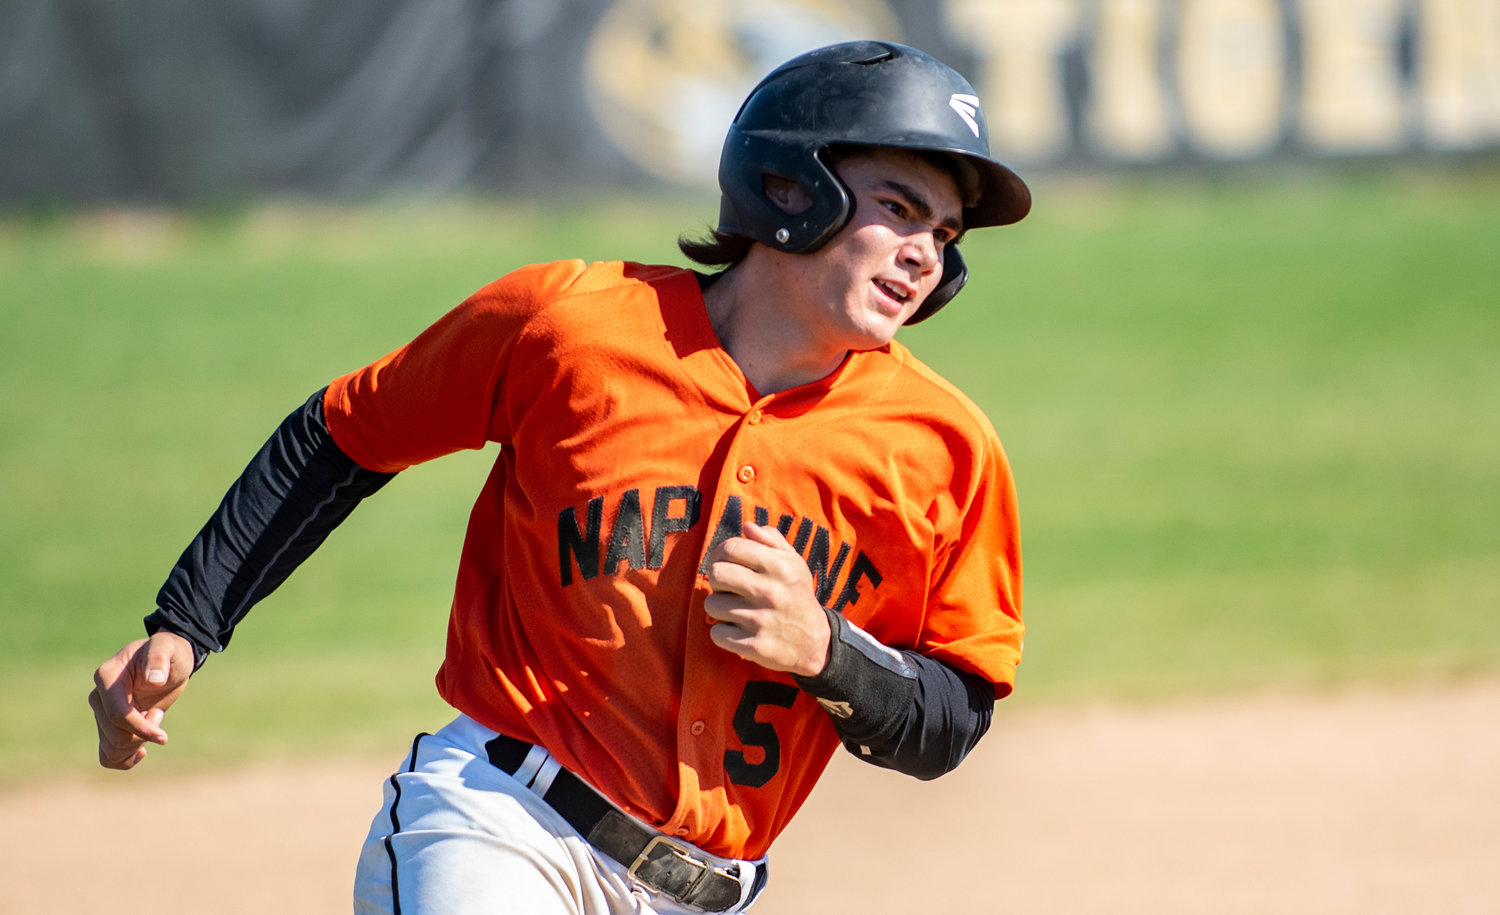 Napavine junior Gavin Parker rounds third base to score a run for the TIigers against Kalama at home on Tuesday.